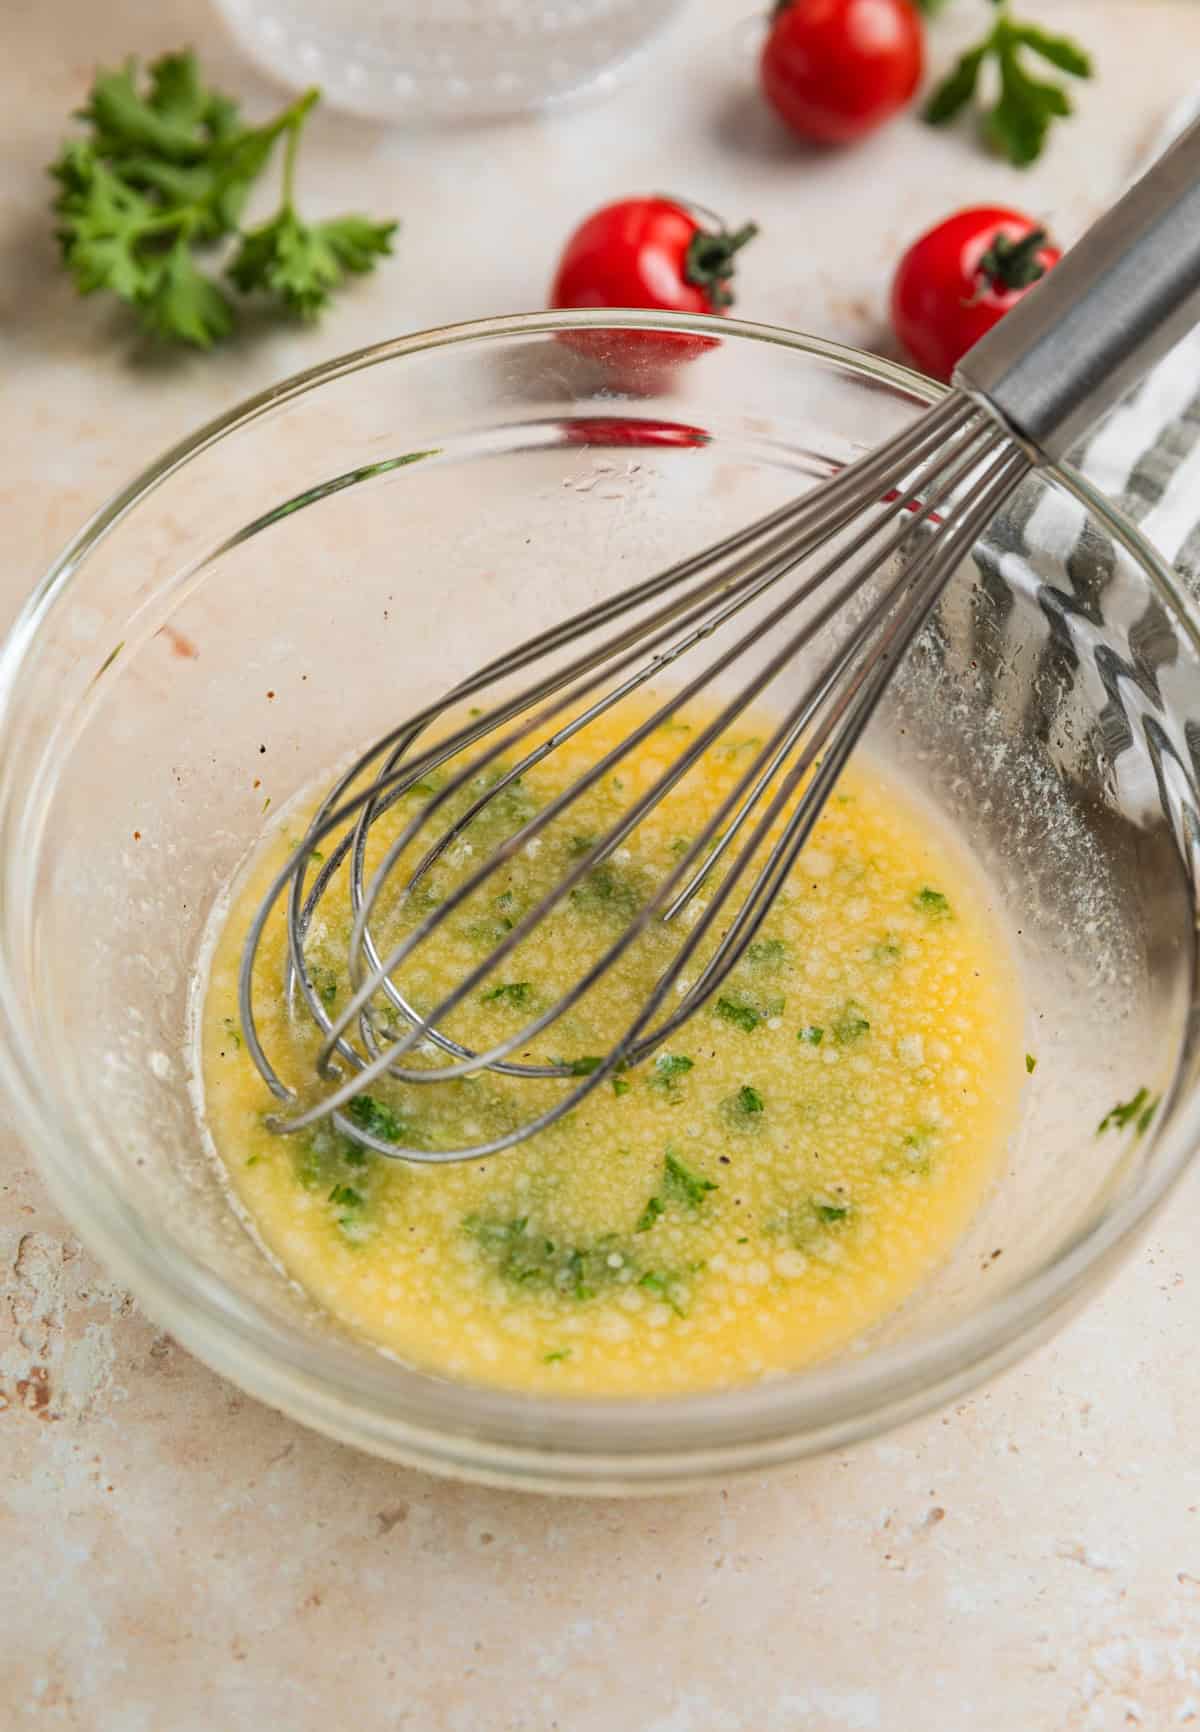 Lemon garlic butter sauce in glass bowl with whisk.